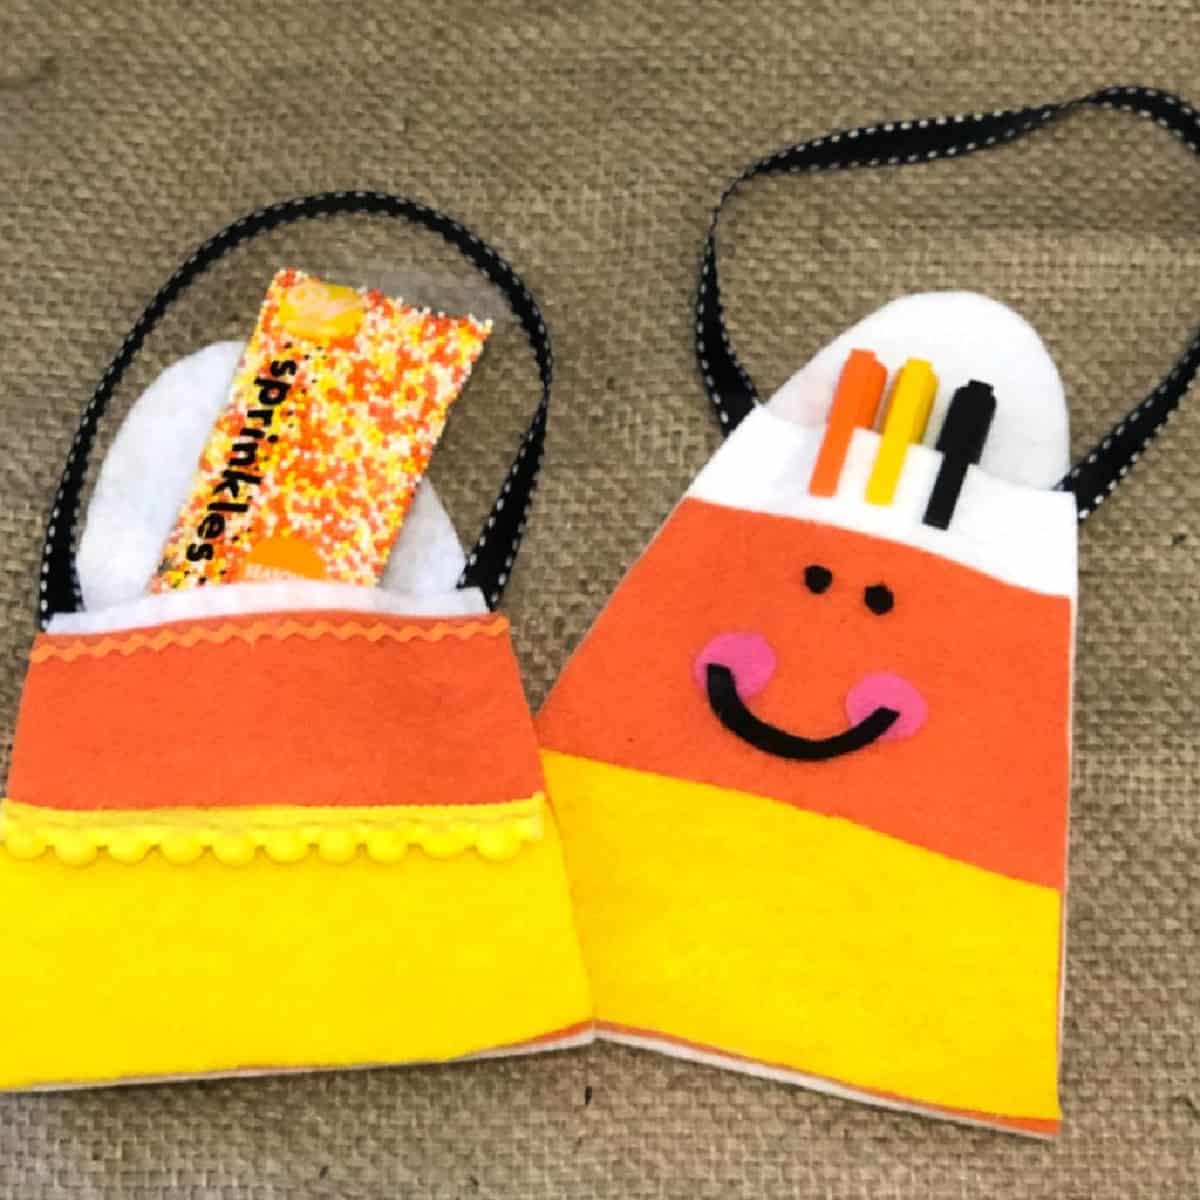 Candy corn kindness goody bags